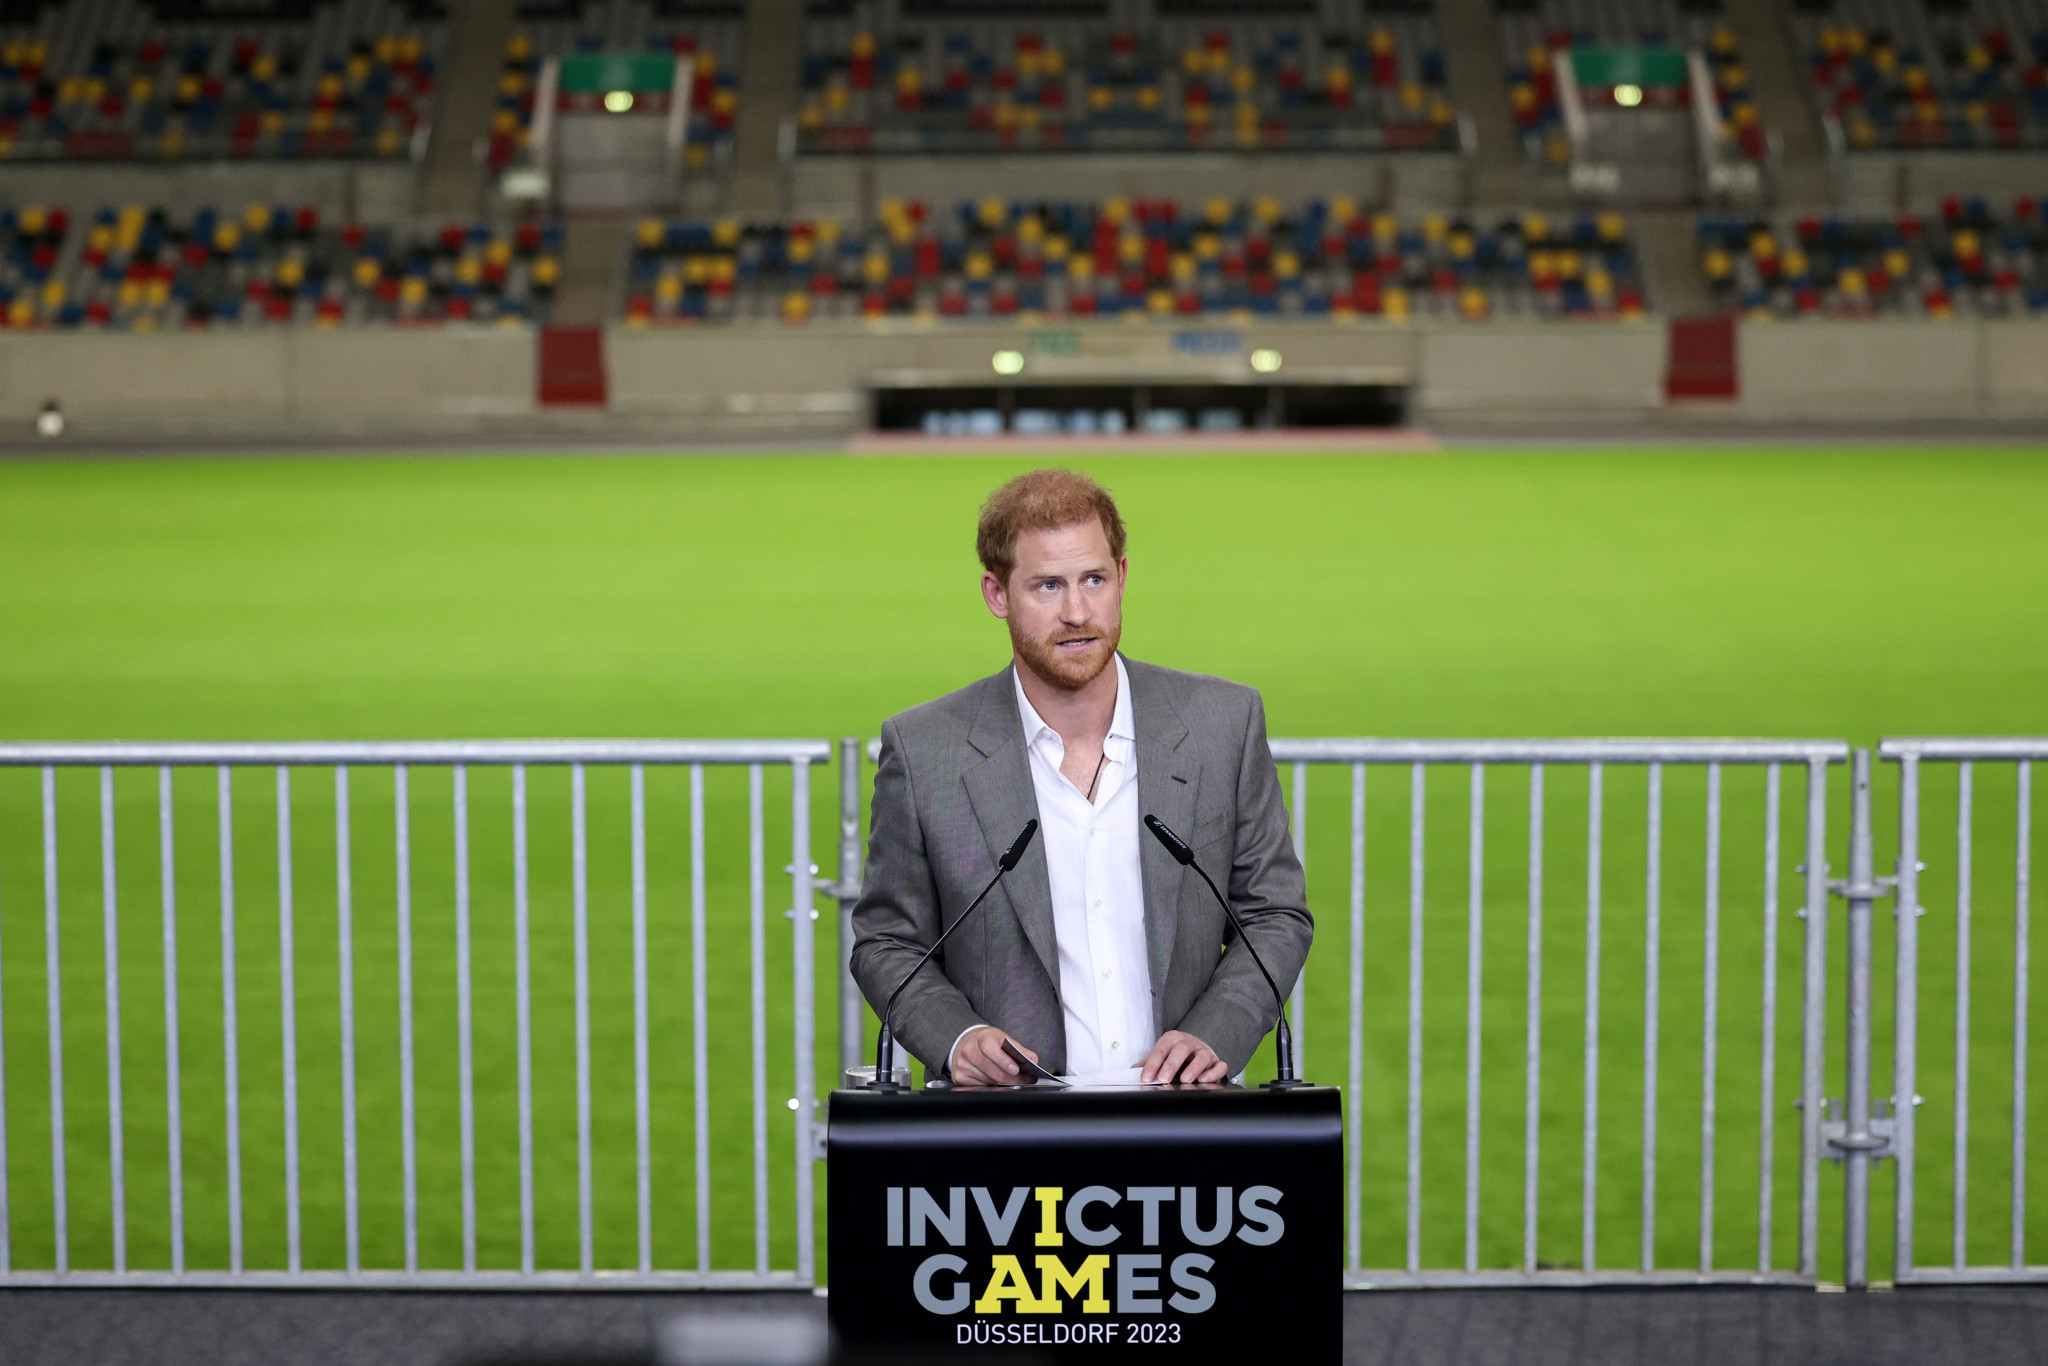 Invictus Games founder Prince Harry said the event aims to provide military personnel with 